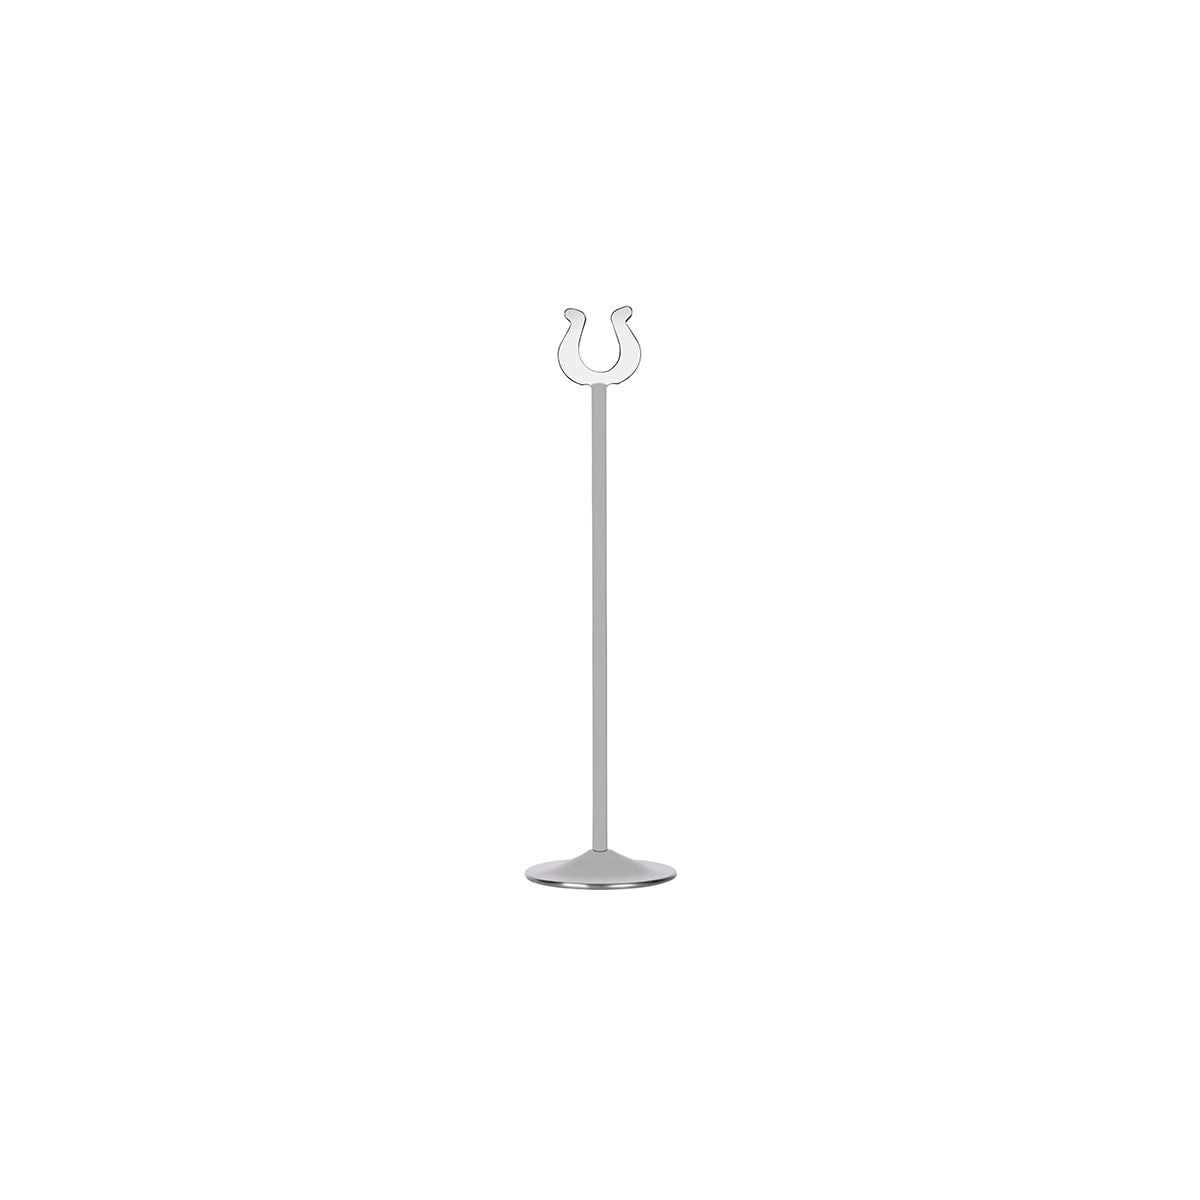 08126 Chef Inox Table Number Stand Stainless Steel 300mm Tomkin Australia Hospitality Supplies